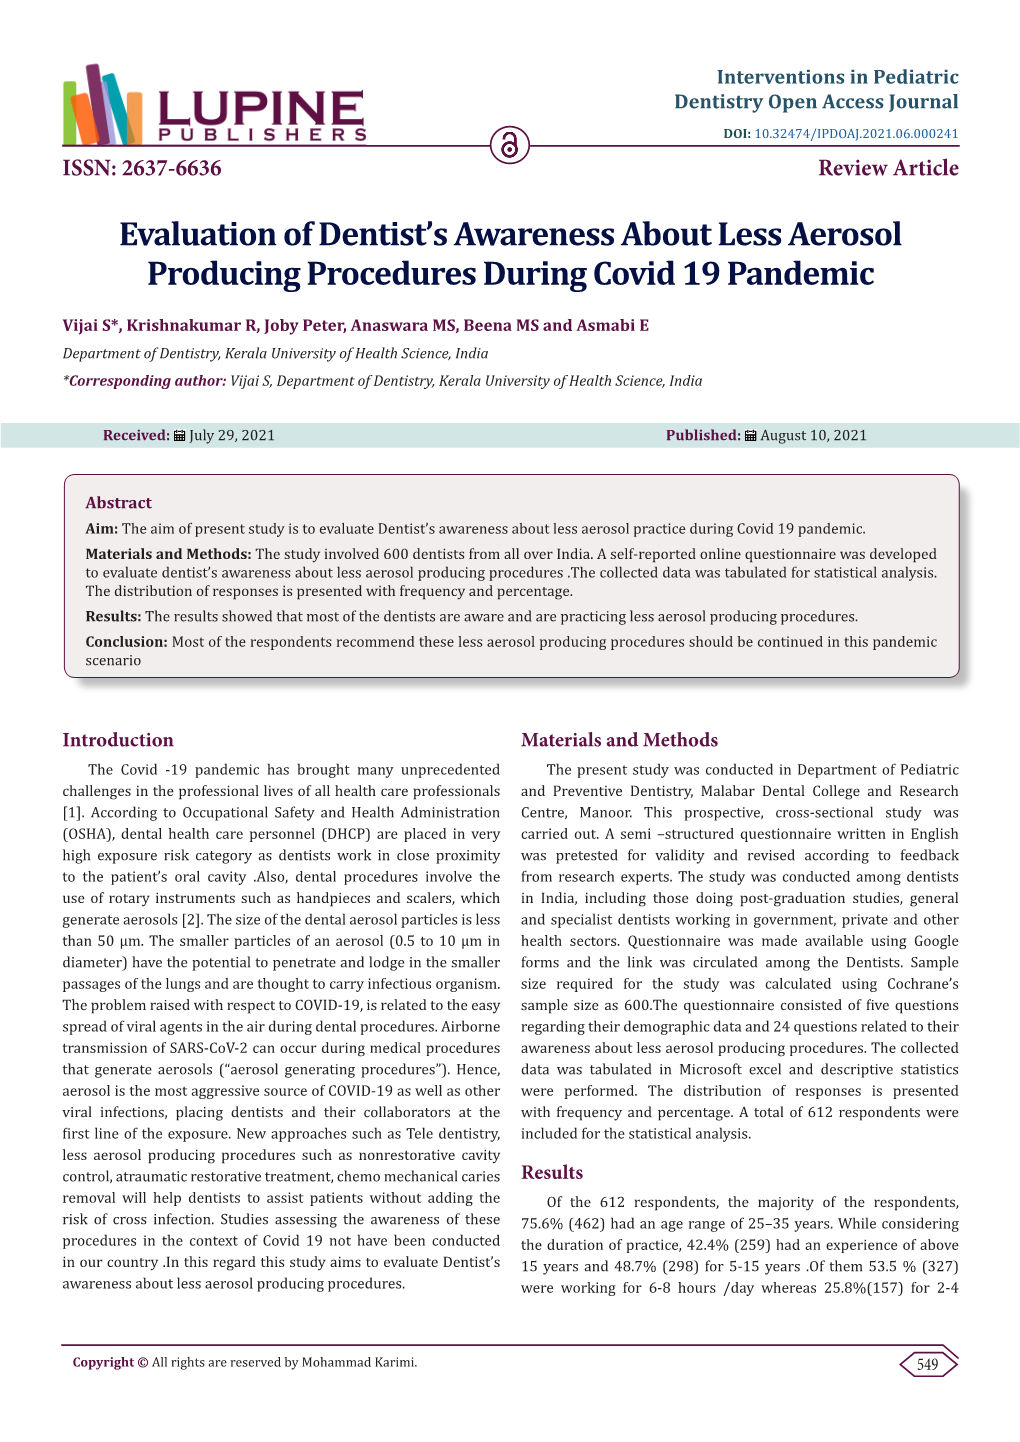 Evaluation of Dentist's Awareness About Less Aerosol Producing